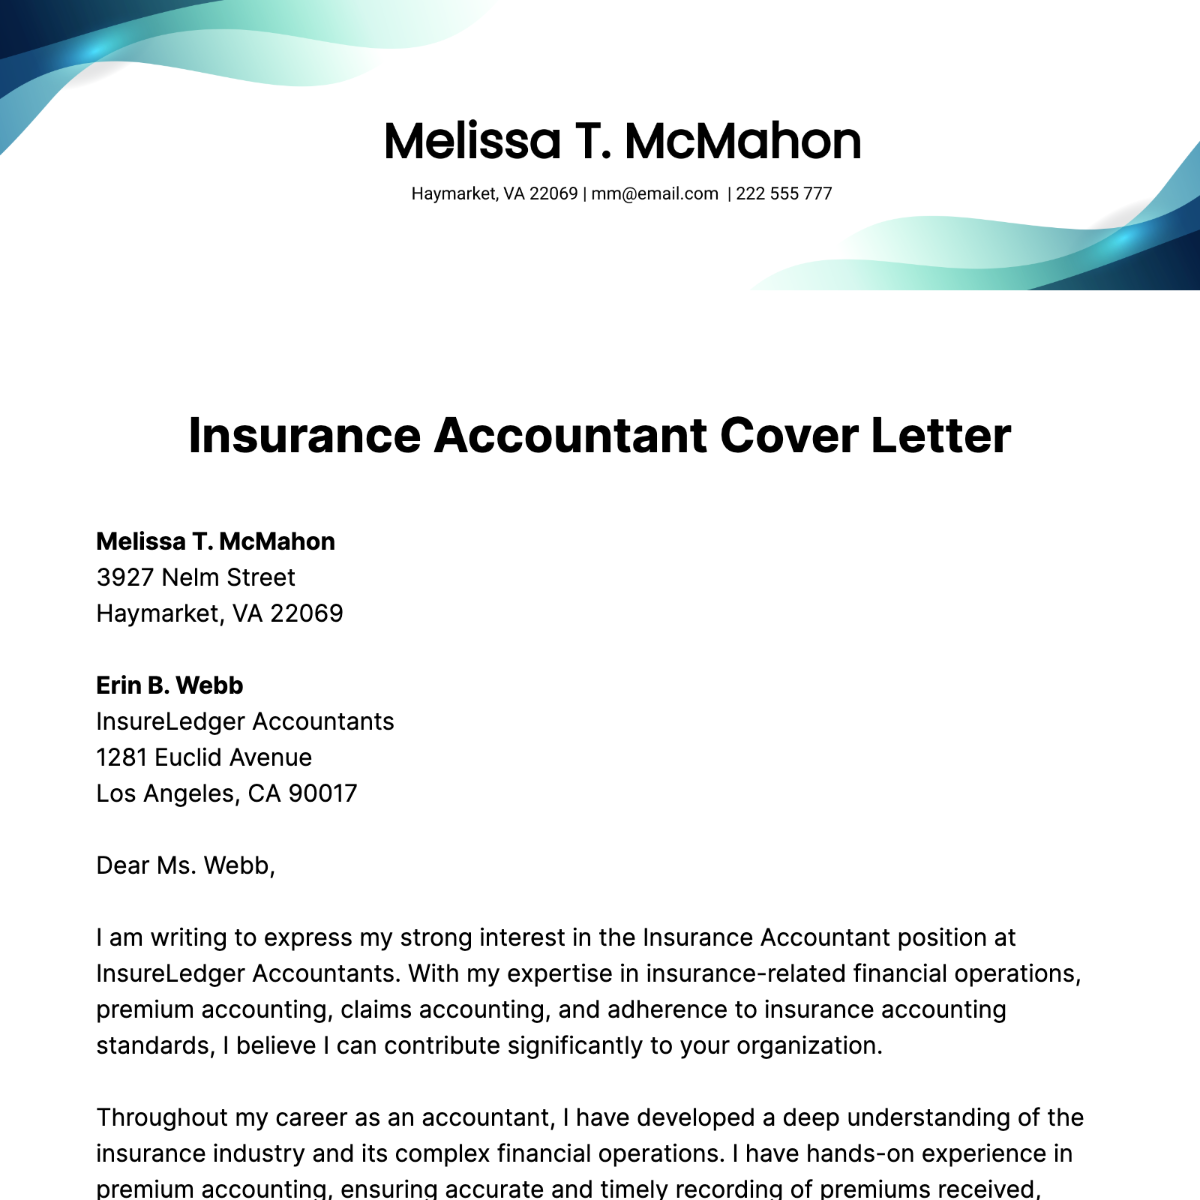 Insurance Accountant Cover Letter Template